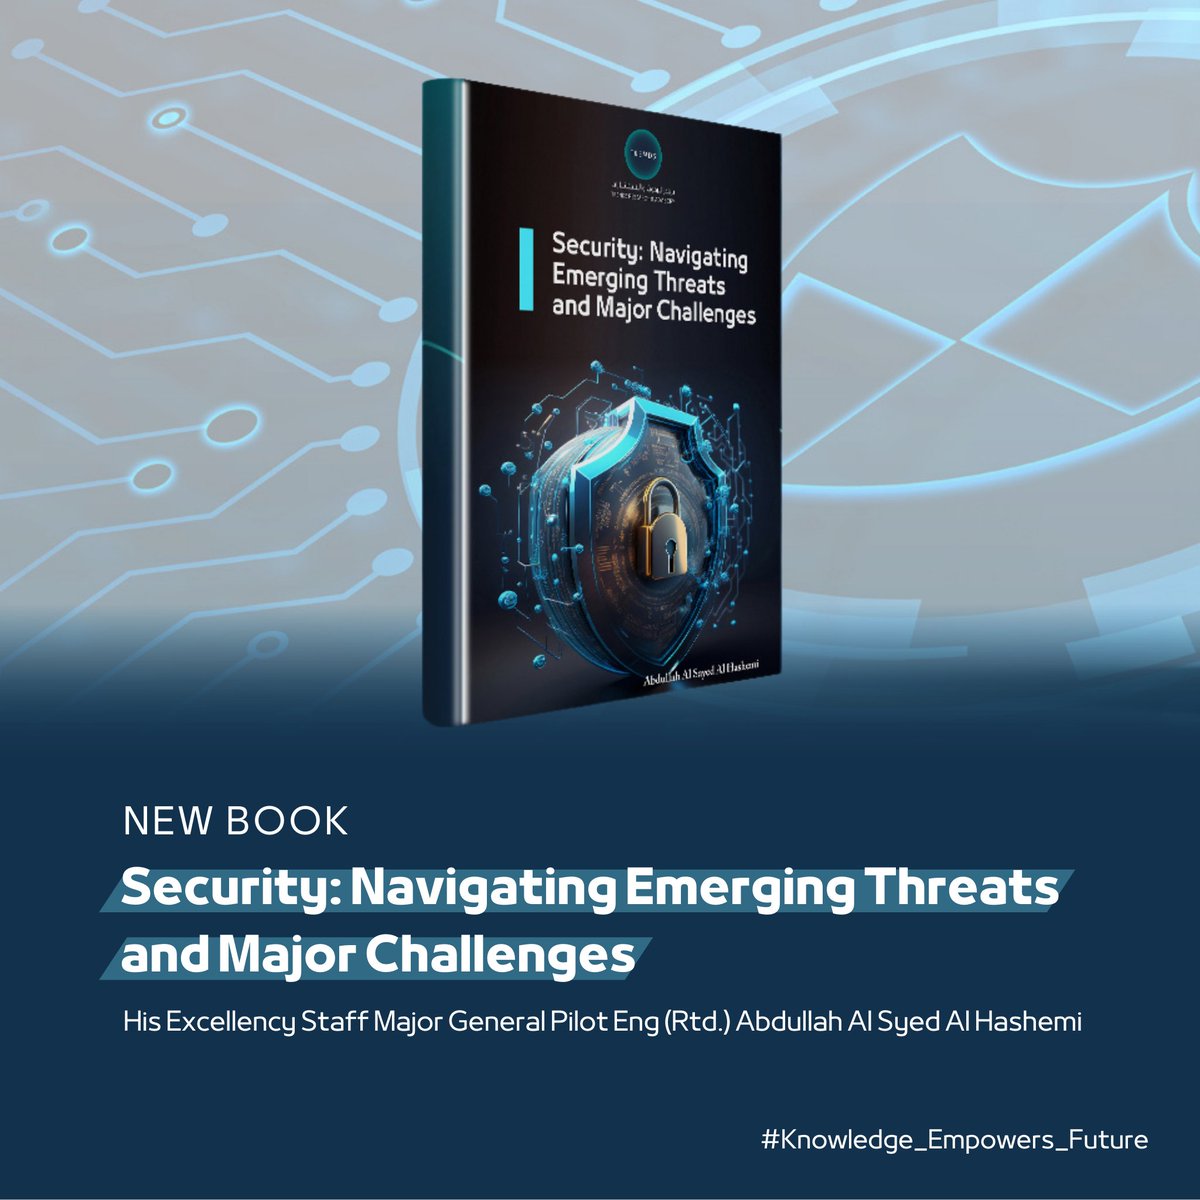 TRENDS Research & Advisory has released the English edition of the 'Security: Navigating Emerging Threats and Major Challenges' book, authored by His Excellency Staff Major General Pilot Eng (Rtd.) Abdullah Al Syed Al Hashemi, Vice President of the Emirates Golf Federation.